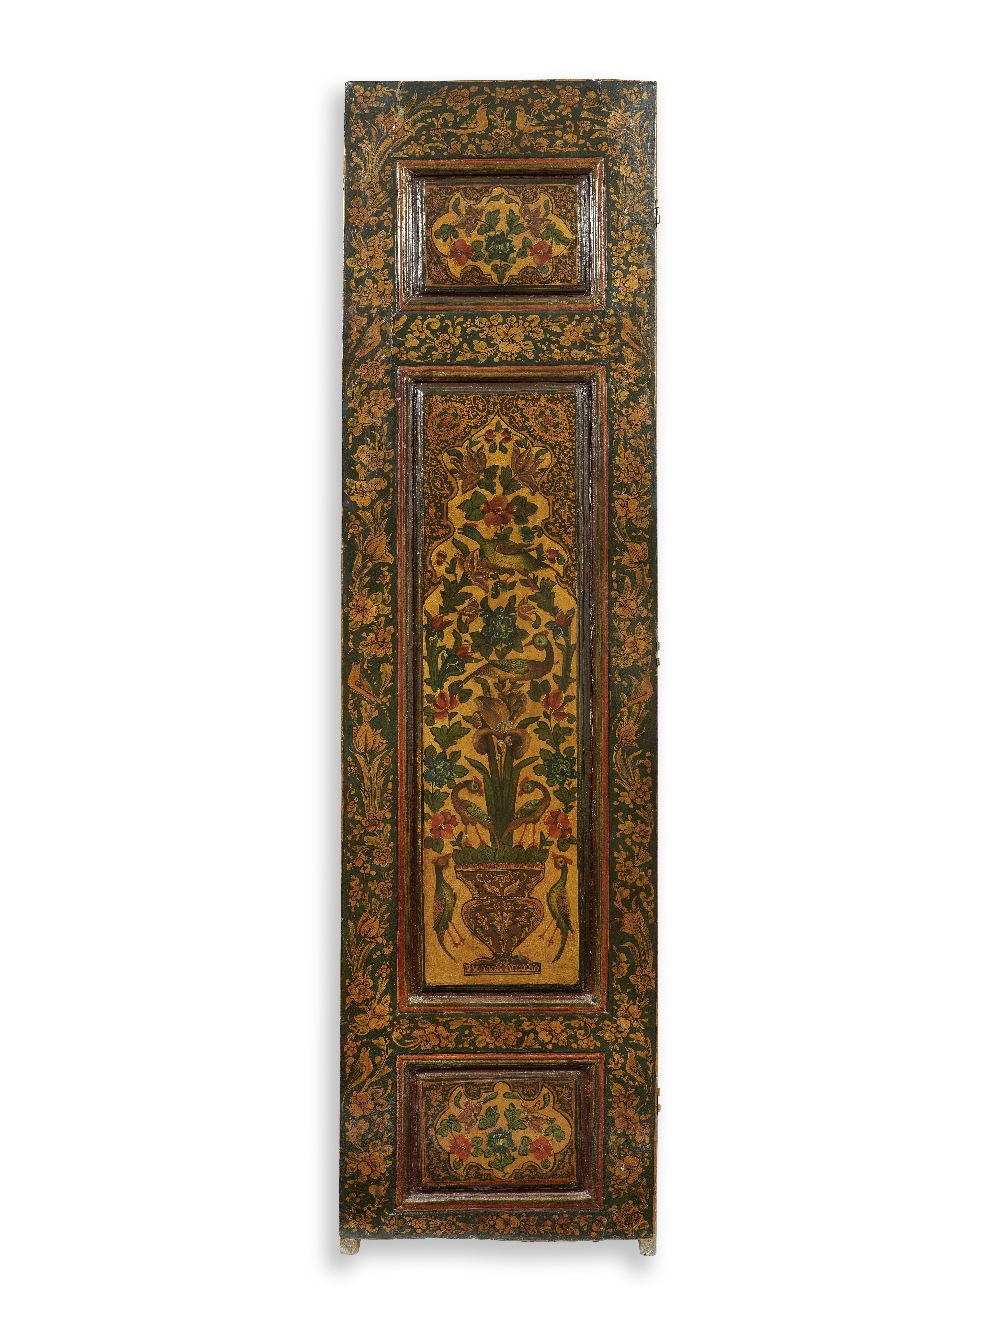 Four Qajar painted and lacquered wood doors converted into a folding screen Persia, 19th Century(4)